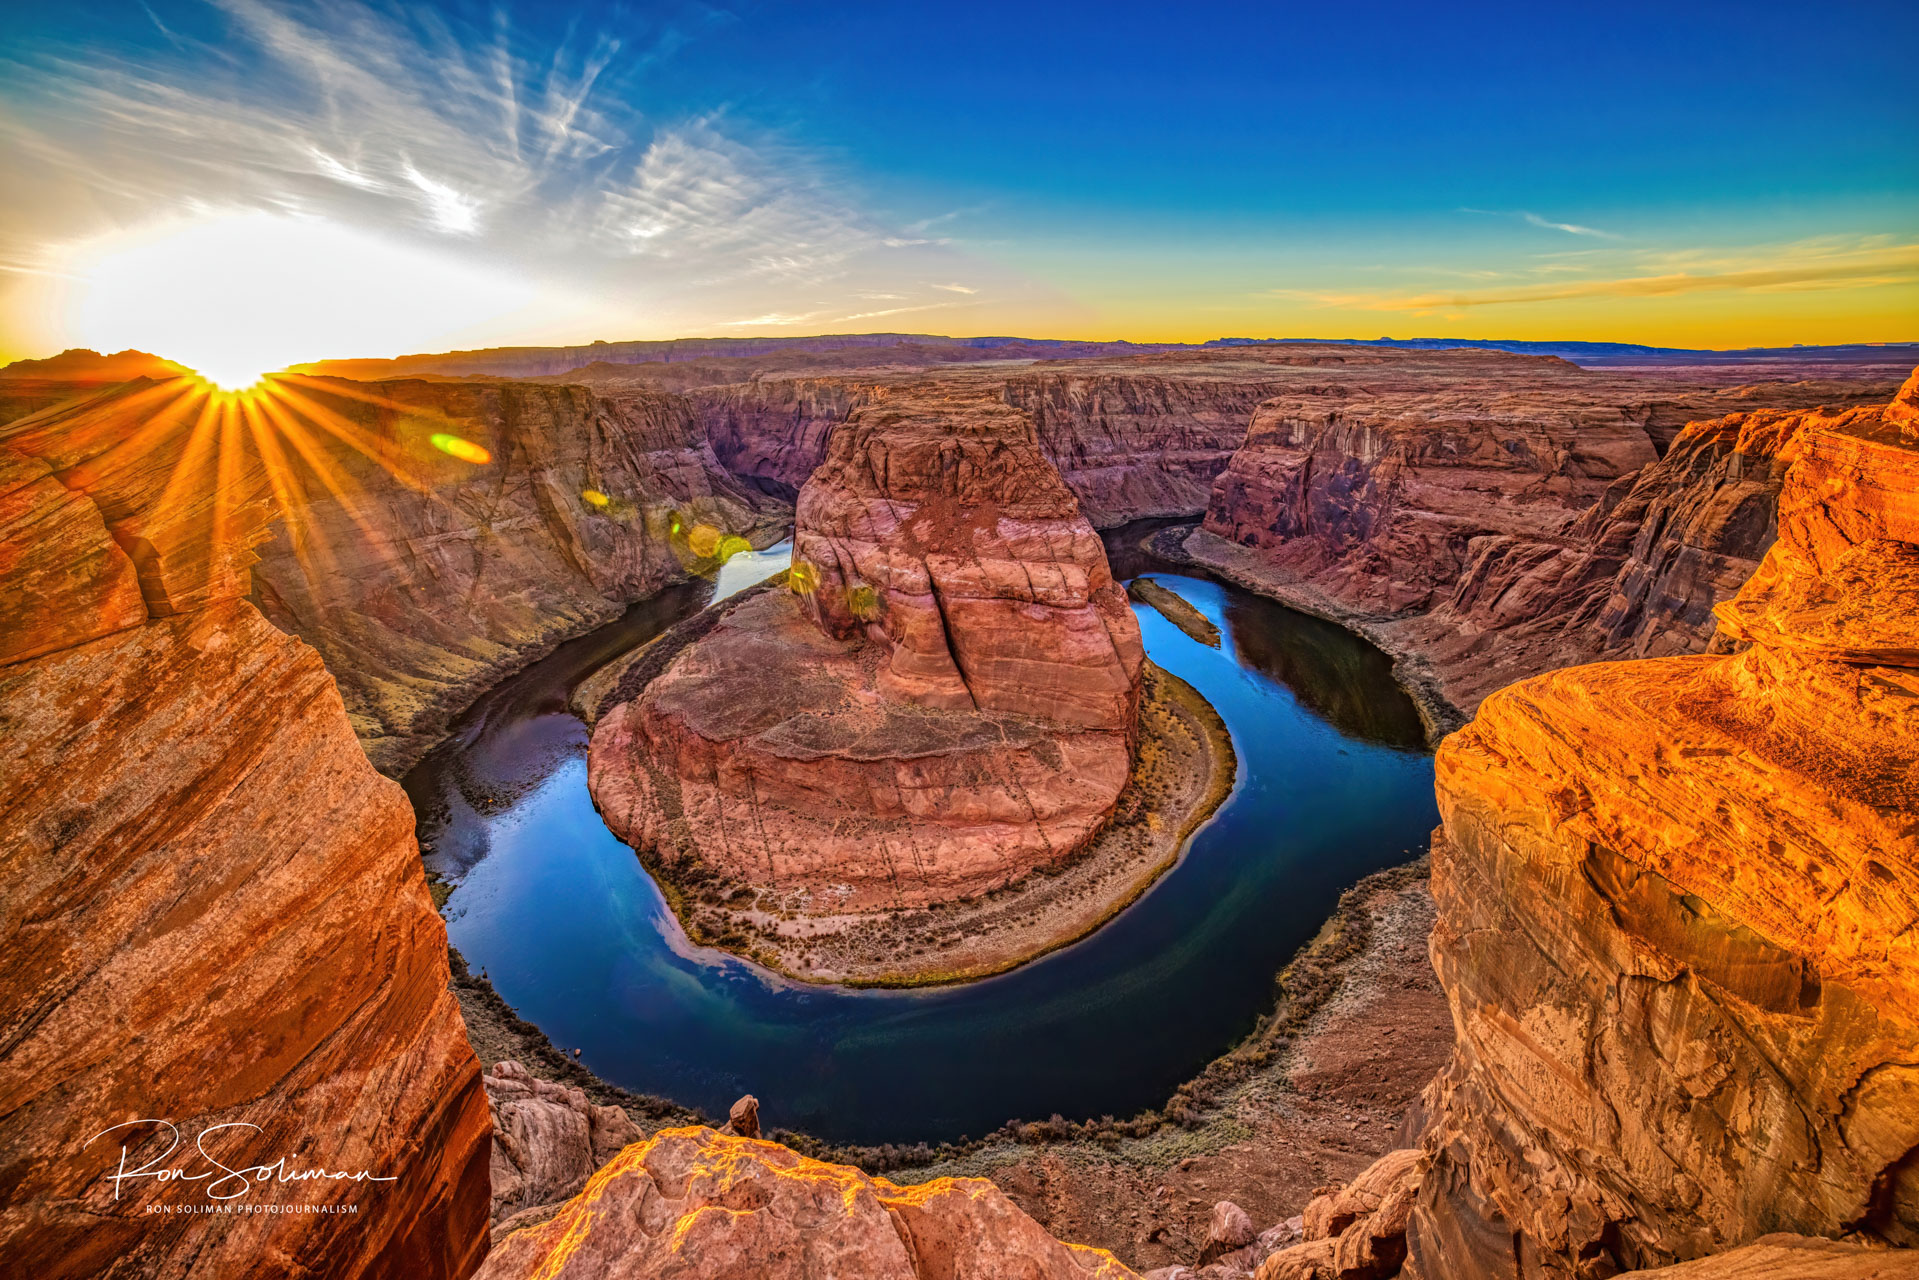 Horseshoe Bend USA - Best Earth Day photos